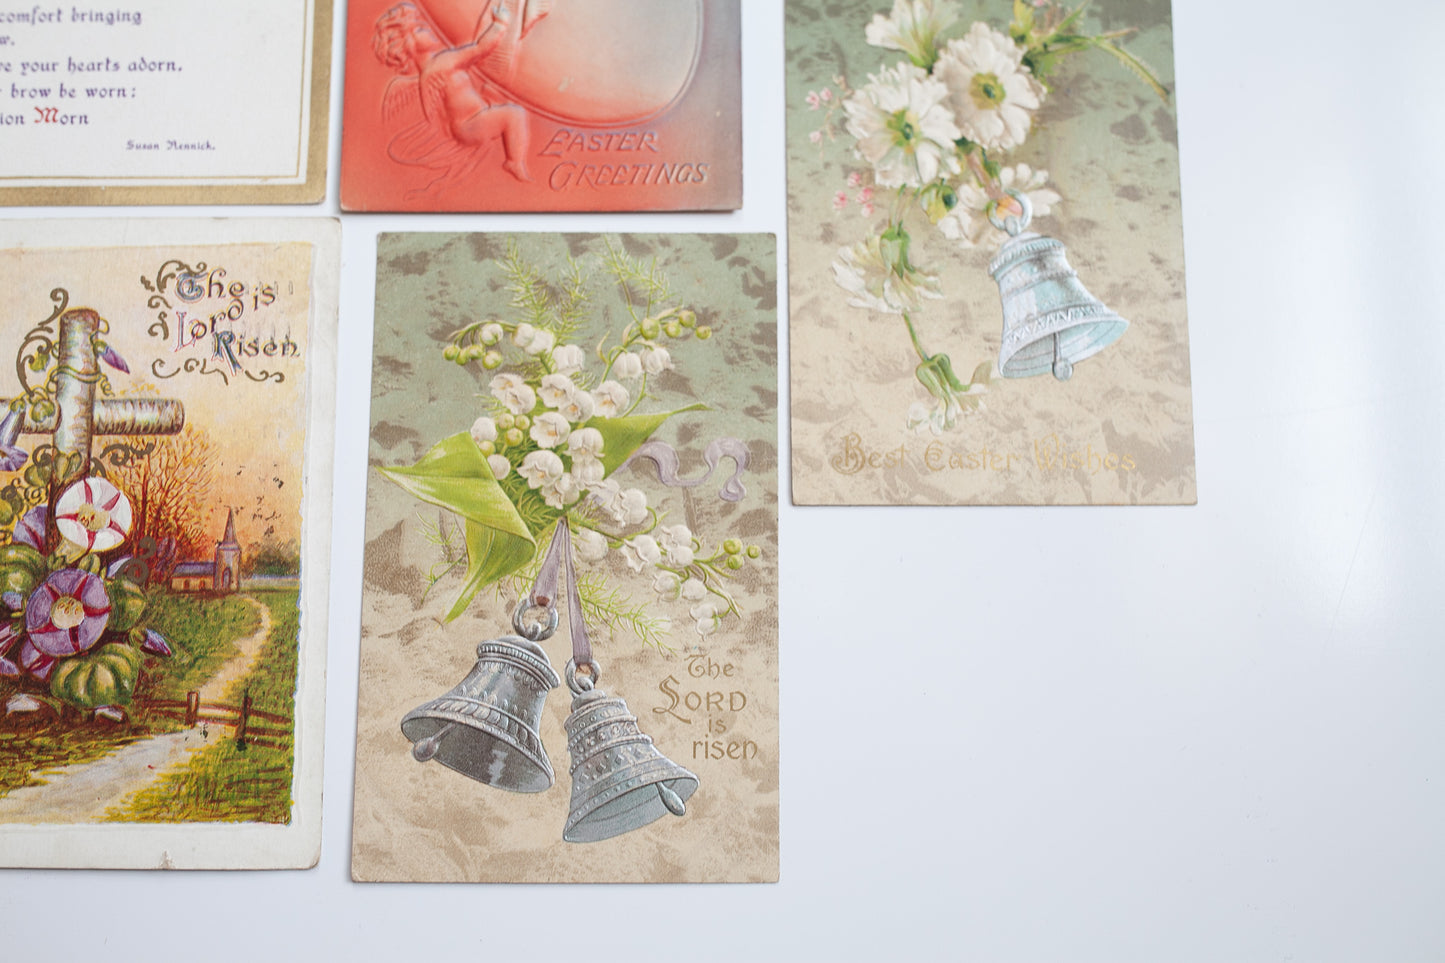 Antique Easter Post Cards - Post Cards